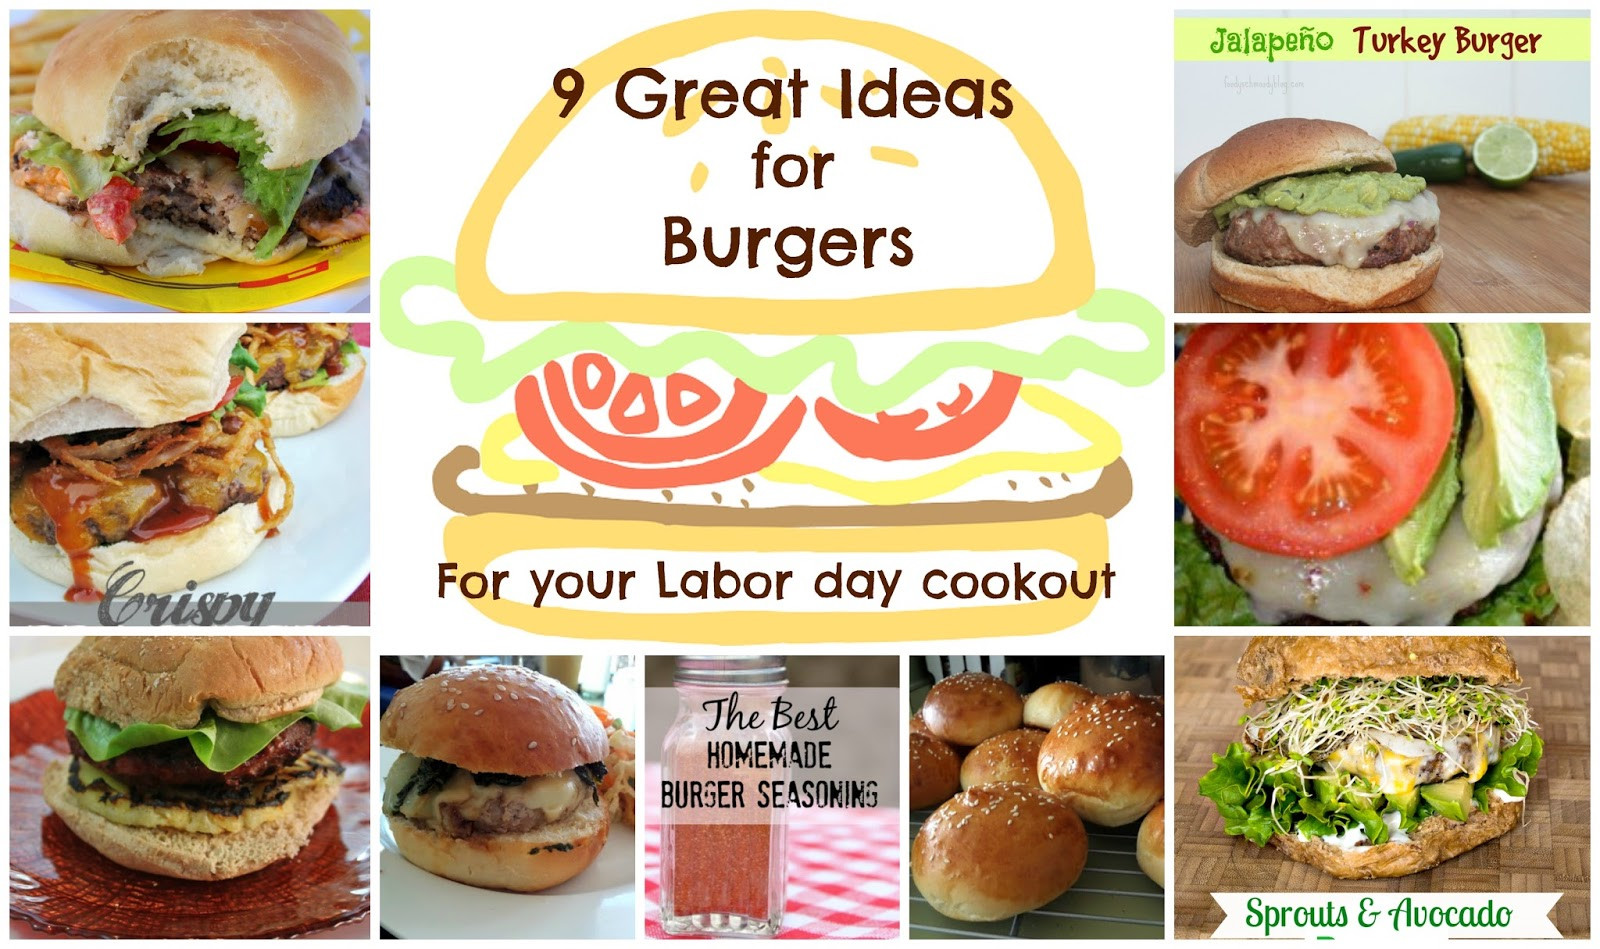 Labor Day Cookout Ideas
 9 Great Ideas for Burgers for your Labor Day cookout